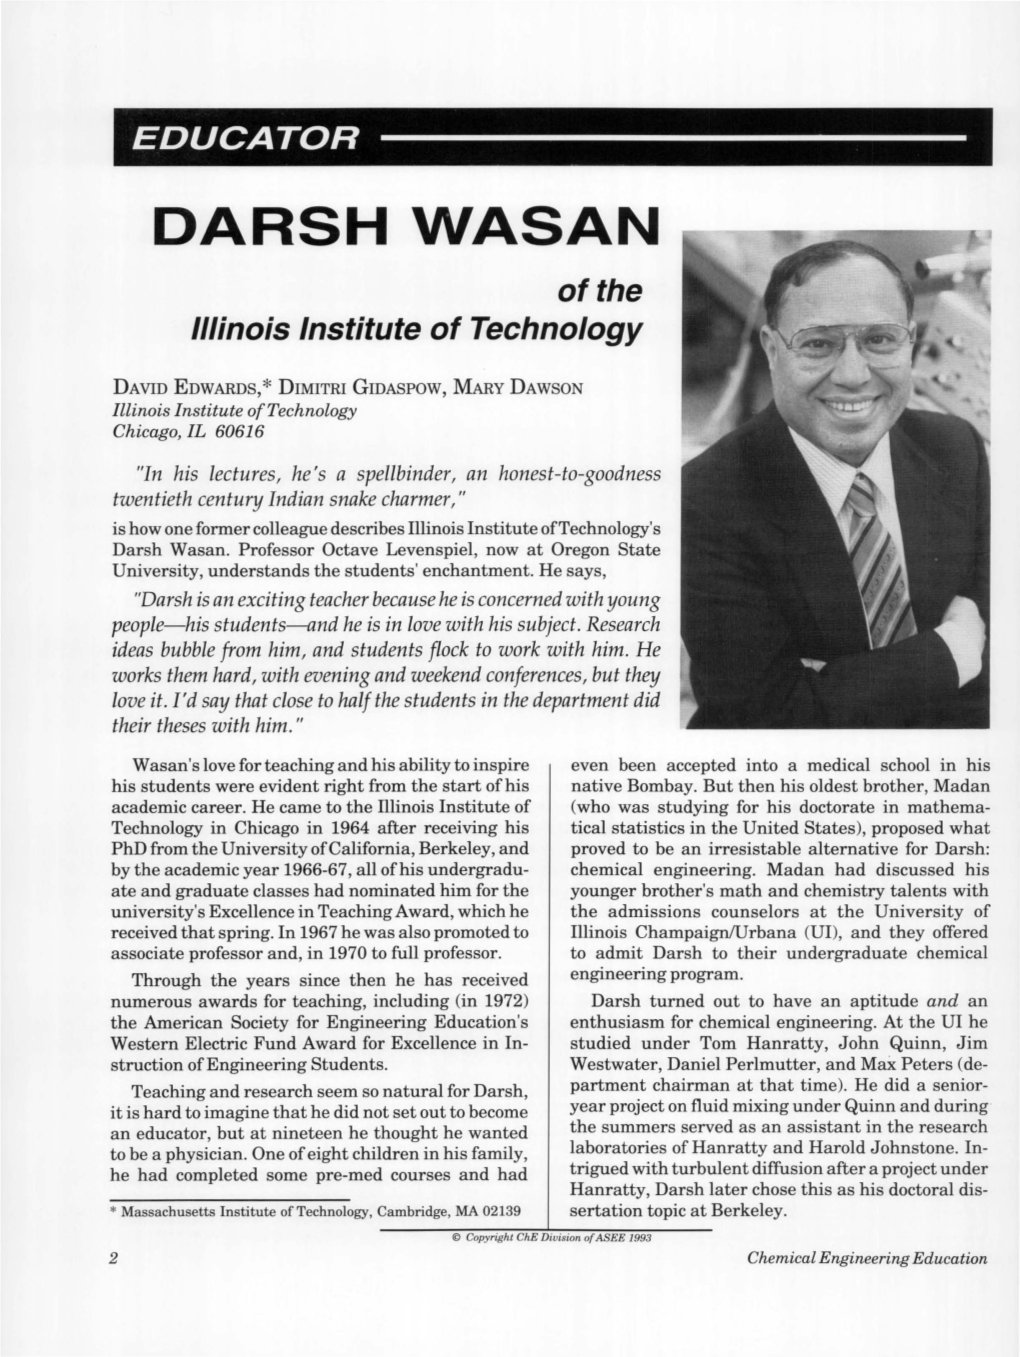 DARSH WASAN of the Illinois Institute of Technology